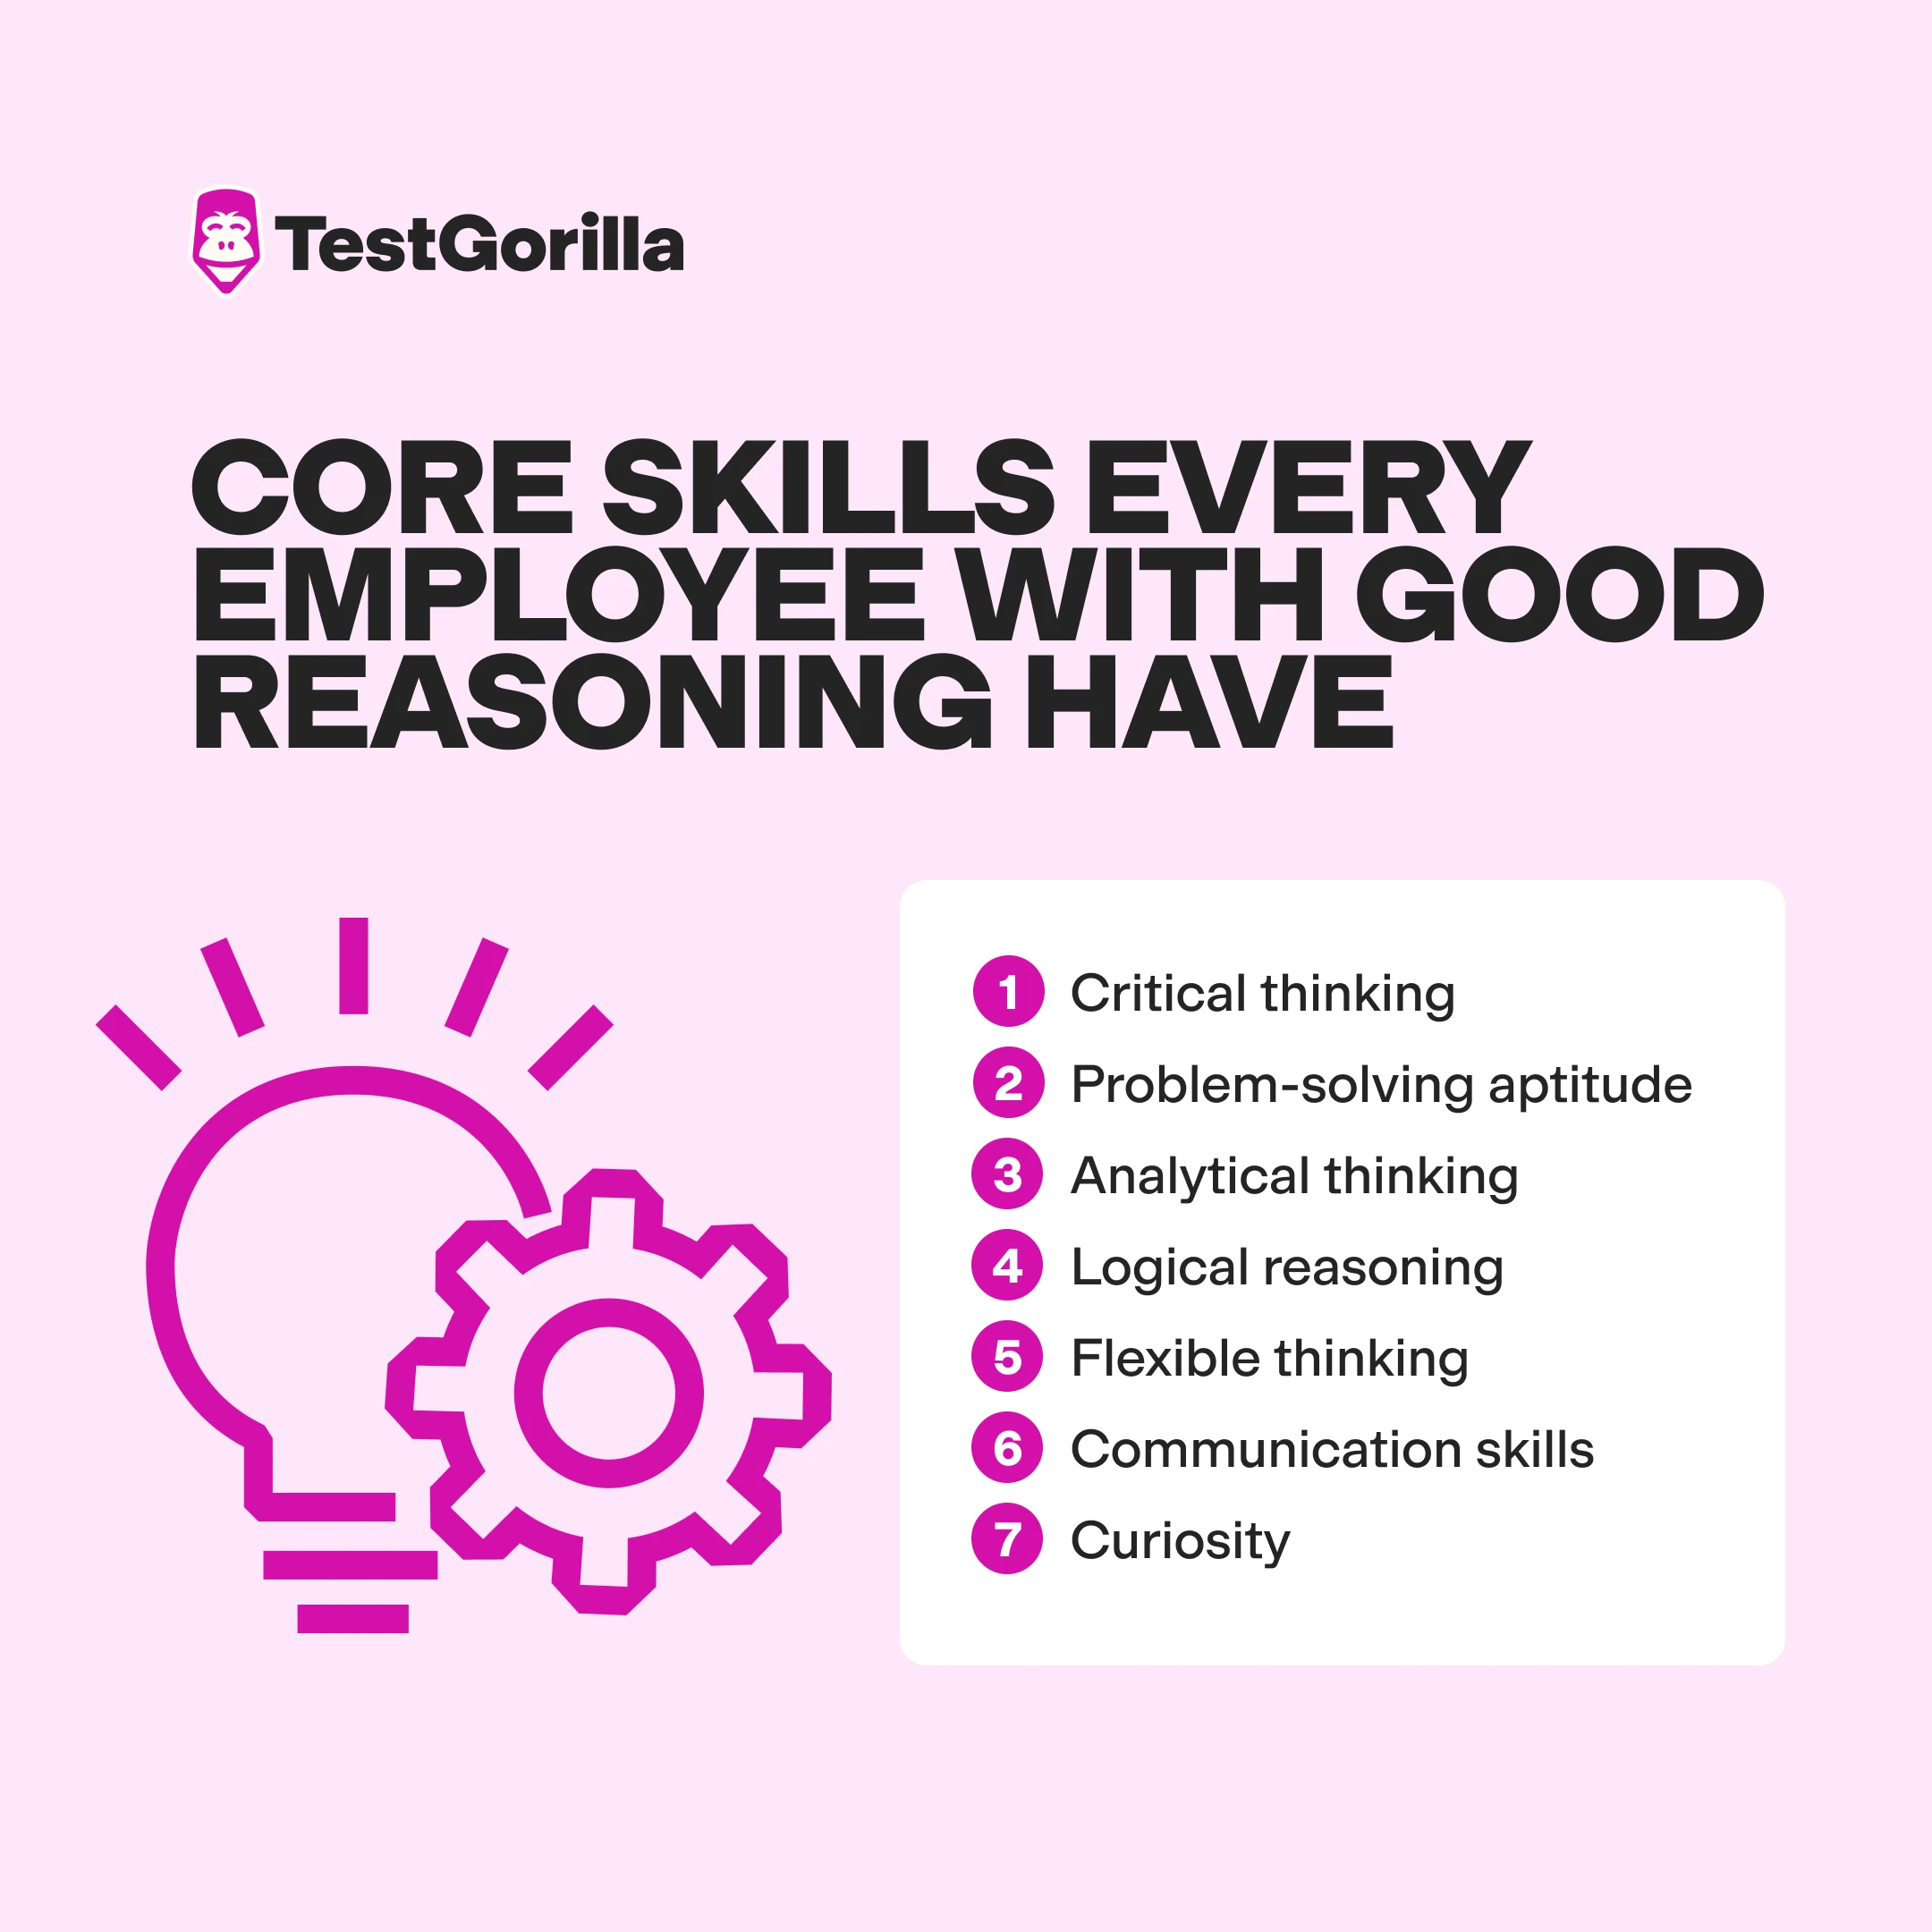 Core-skills-every-employee-with-good-reasoning-have